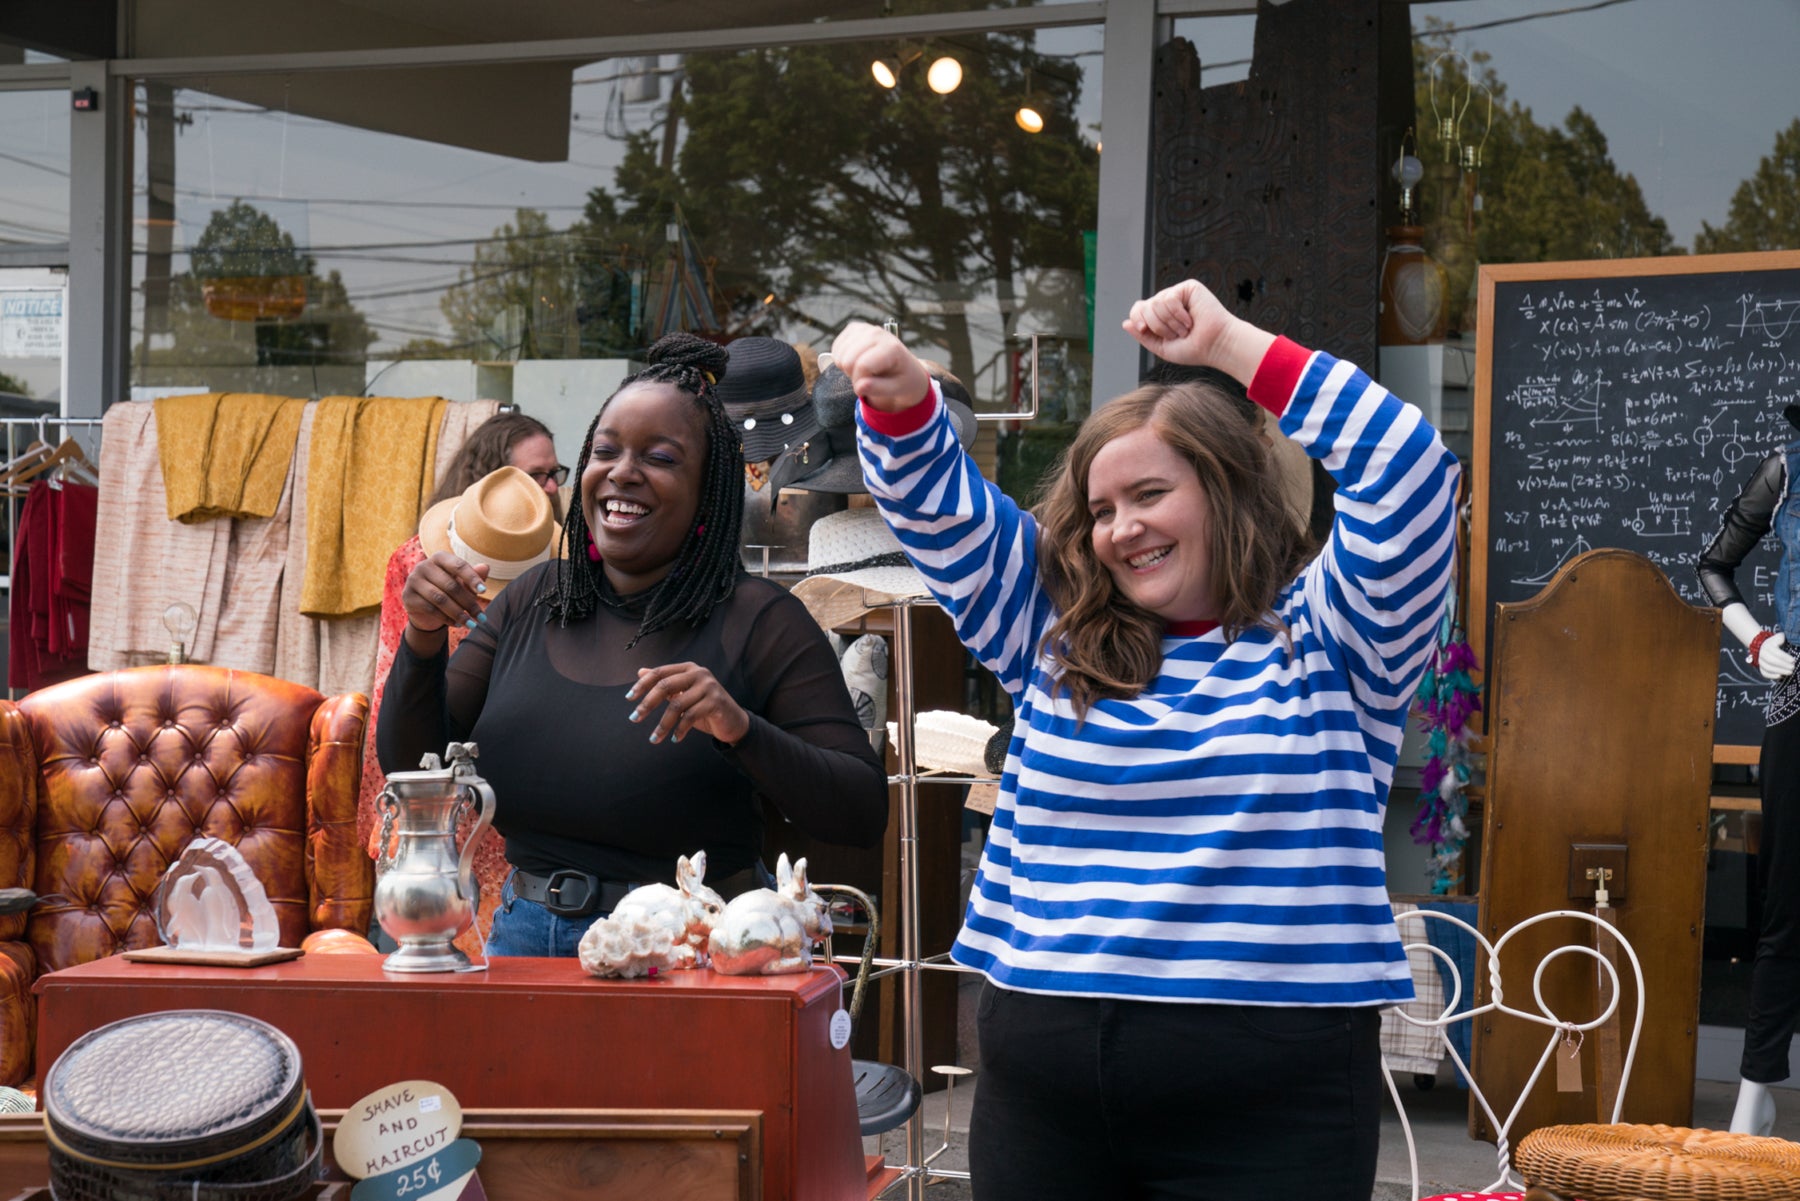 Annie and her roommate laugh and dance at an outdoor antique sale. 